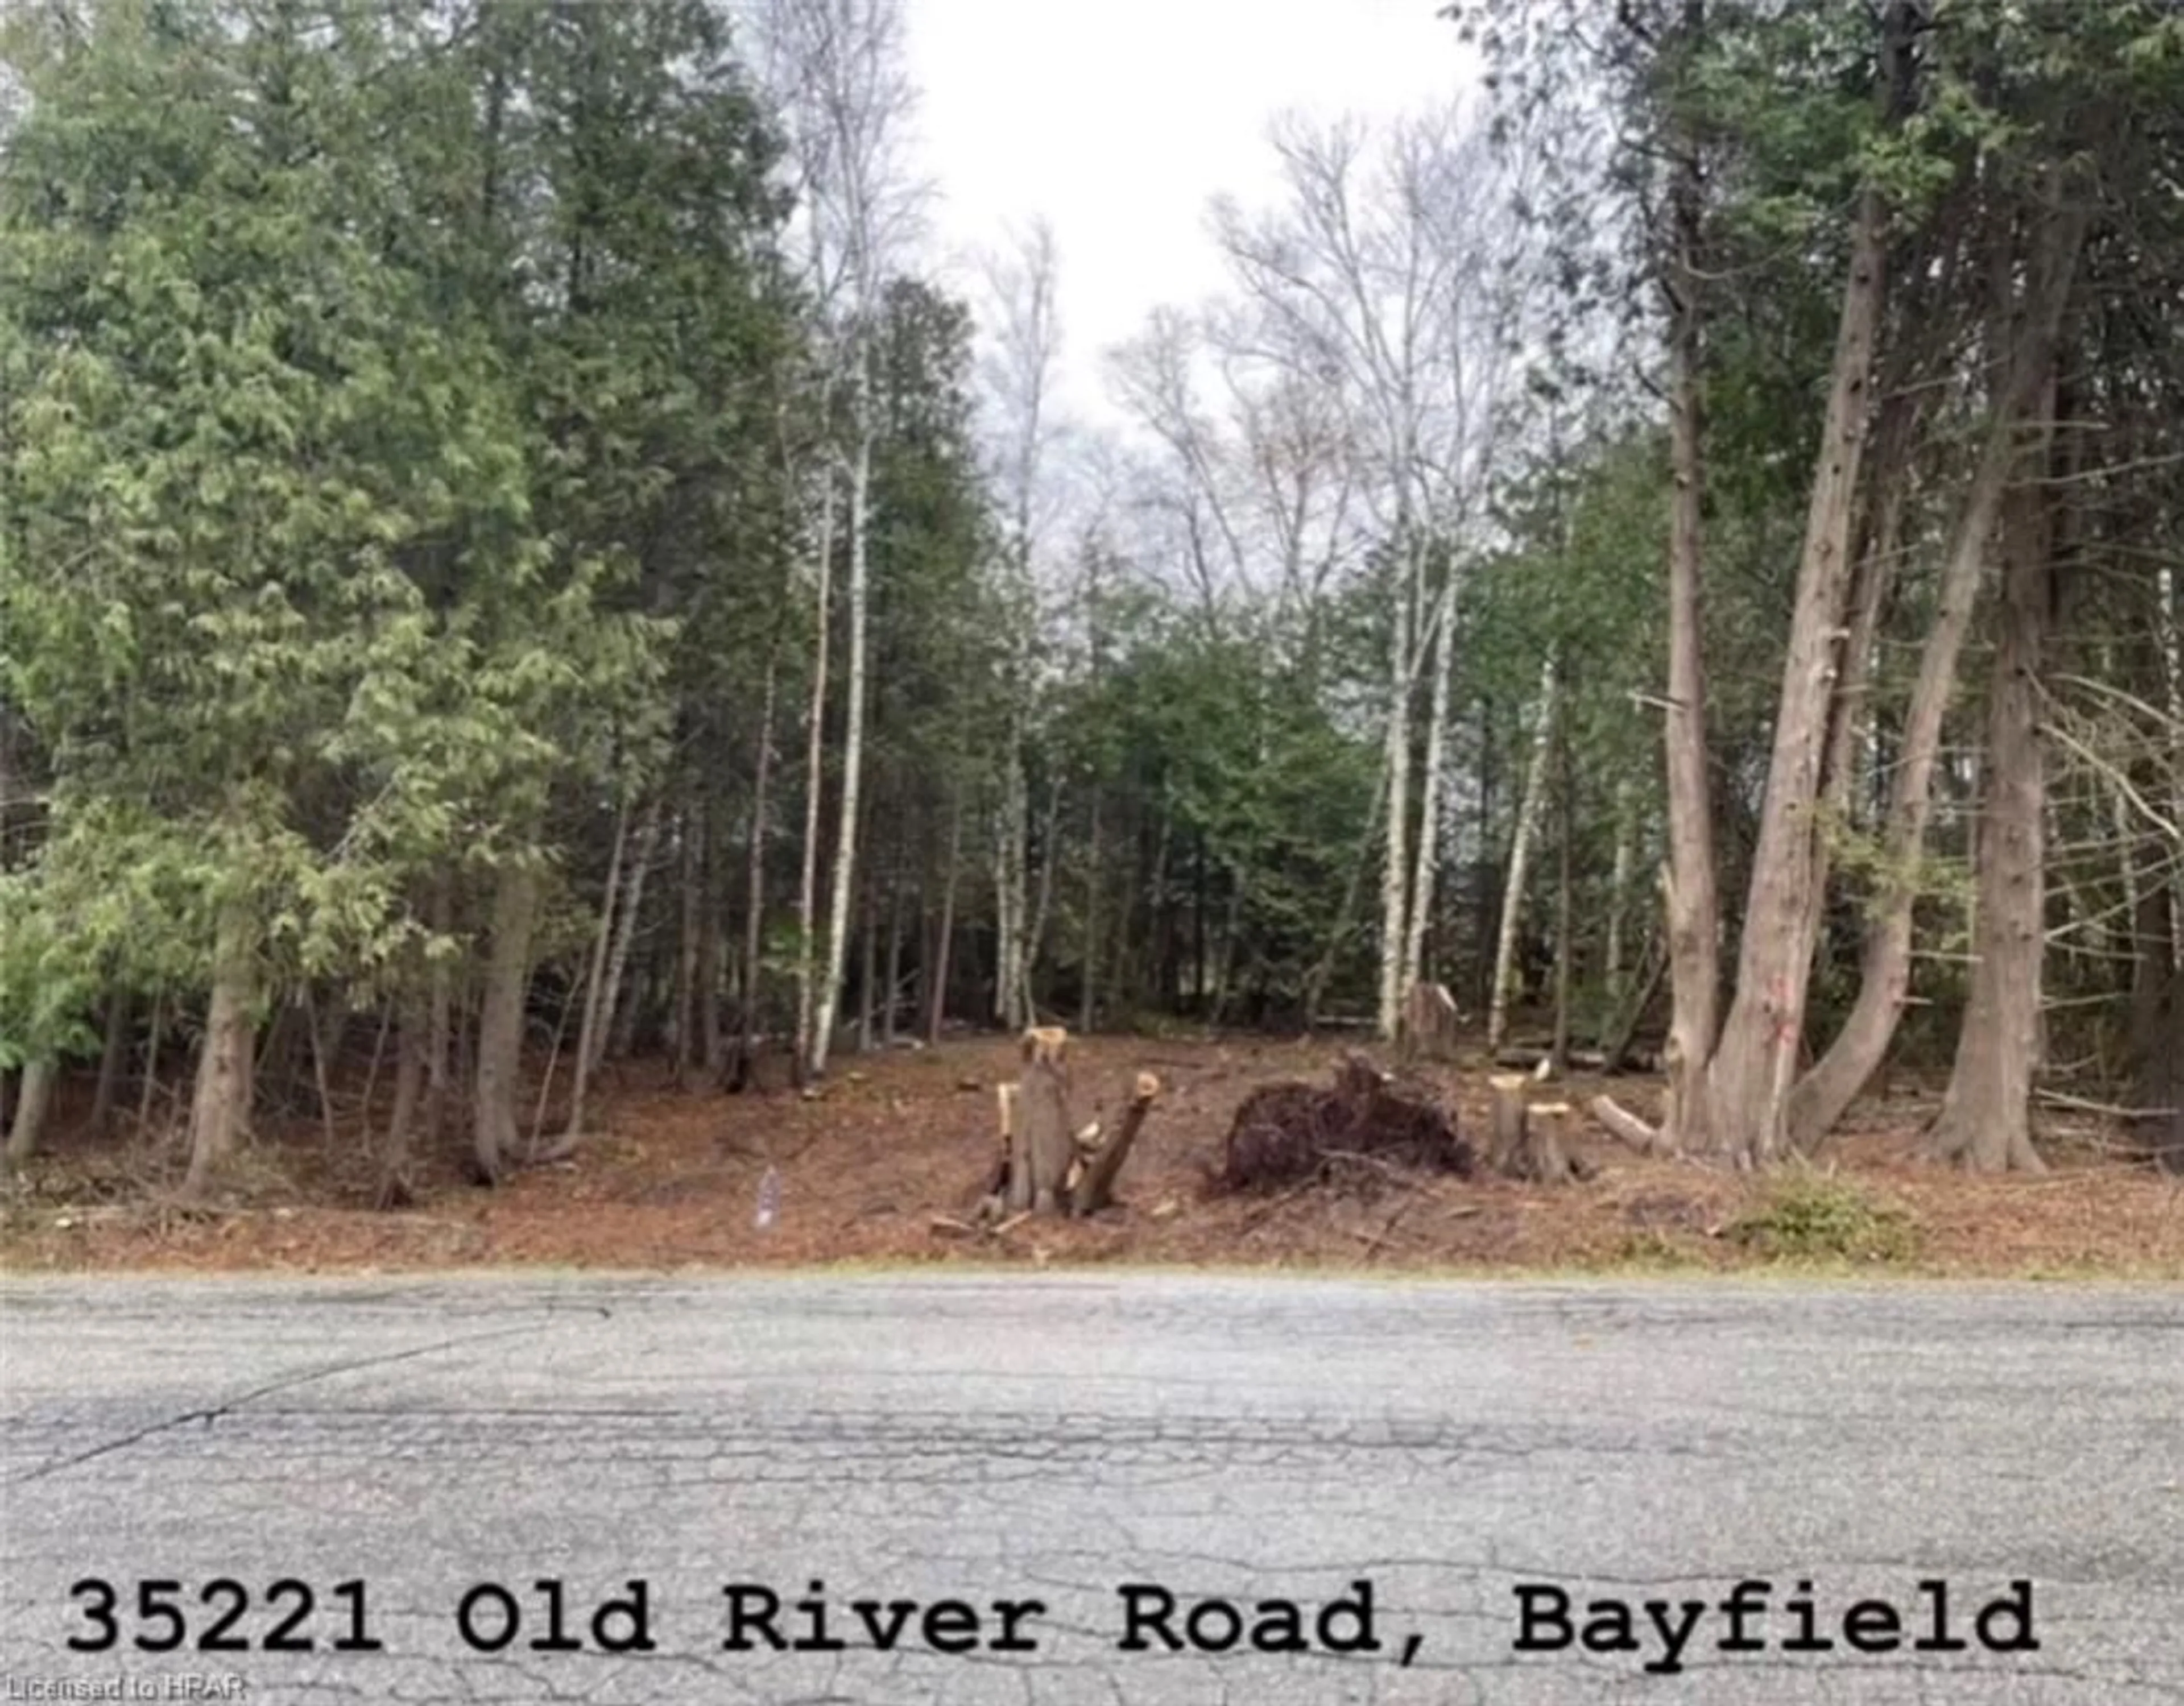 Street view for 35221 Old River Rd, Bayfield Ontario N0M 1G0